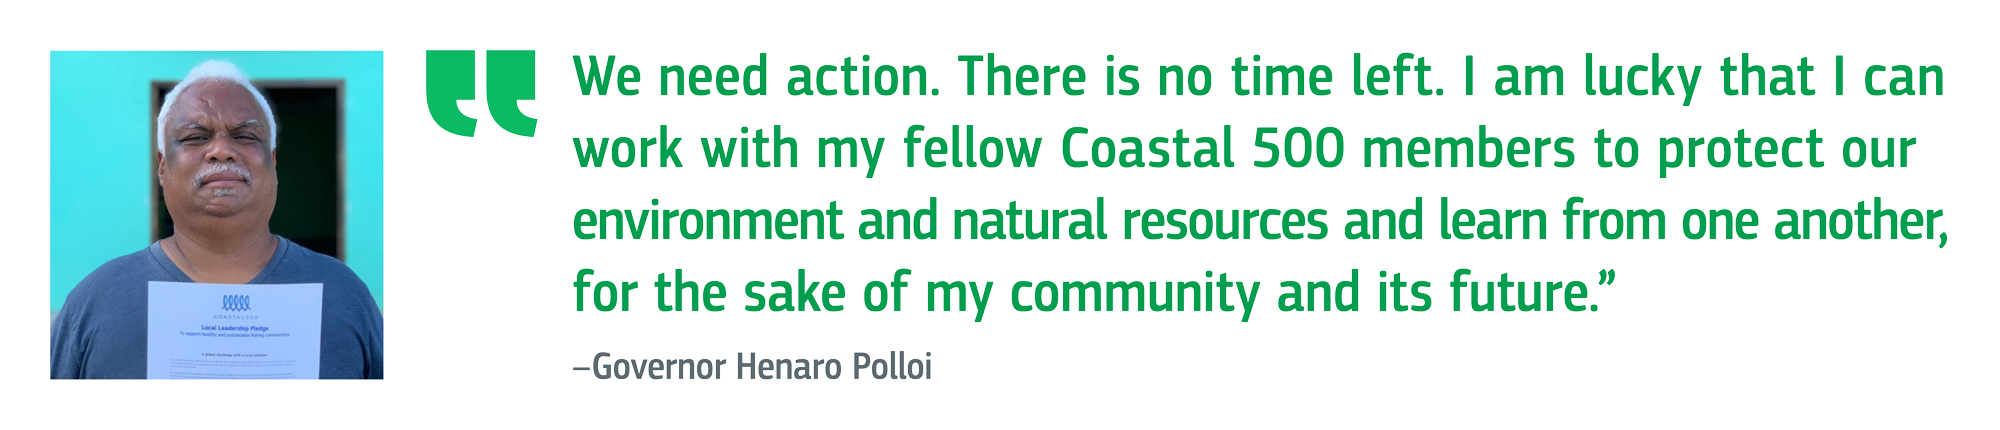 We need action. There is no time left. I am lucky that I can work with my fellow Coastal 500 members to protect our environment and natural resources and learn from one another, for the sake of my community and its future. Governor Henaro Polloi